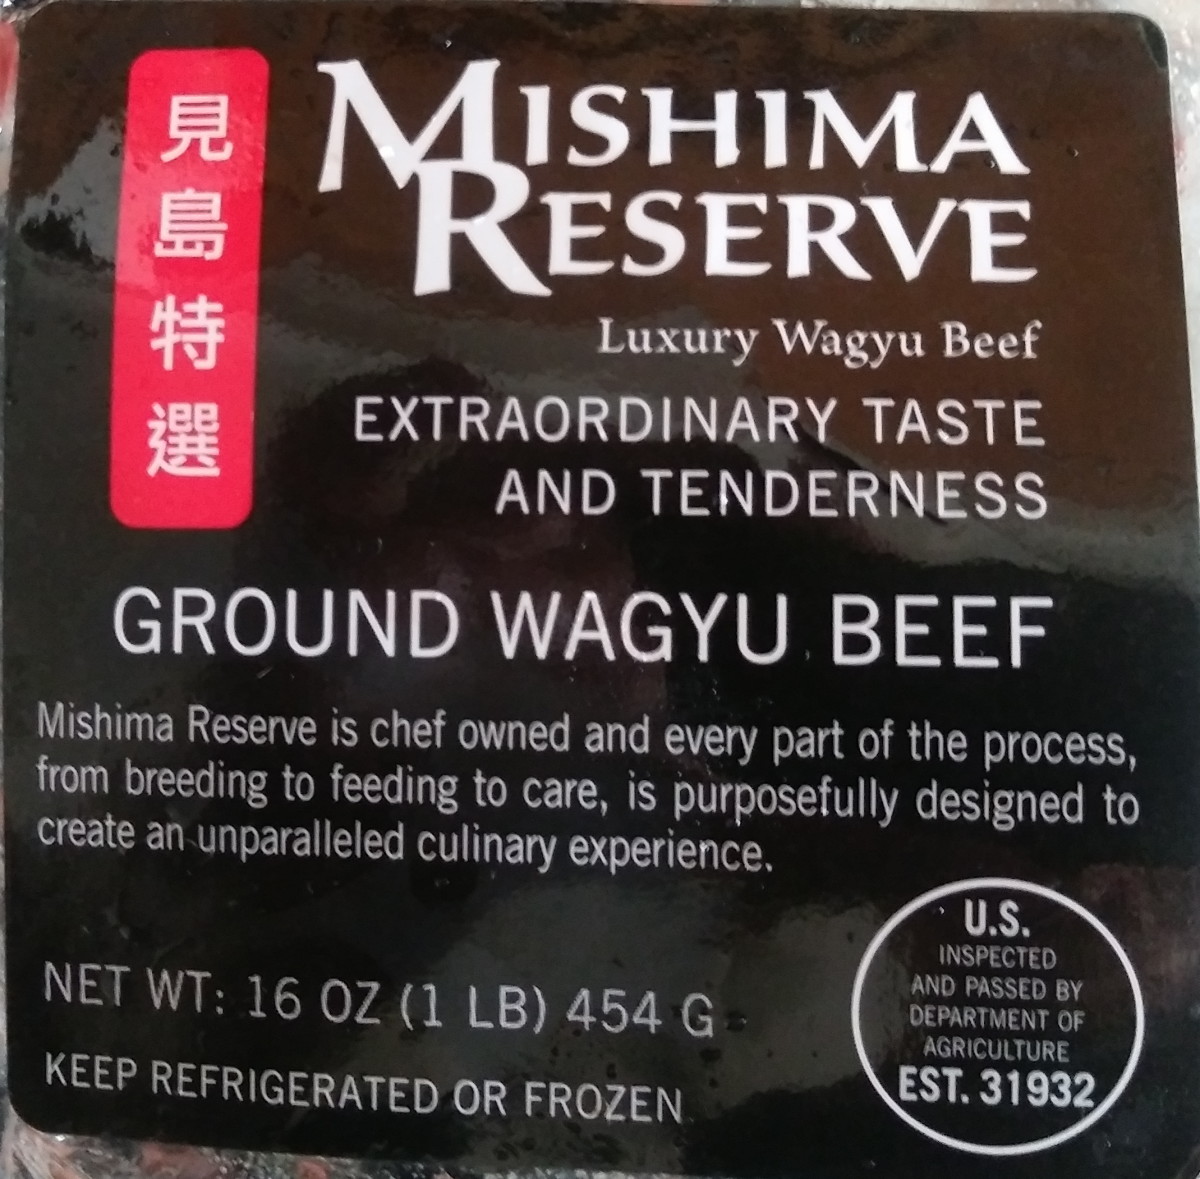 Mishima Reserve Luxury Wagyu Beef Review